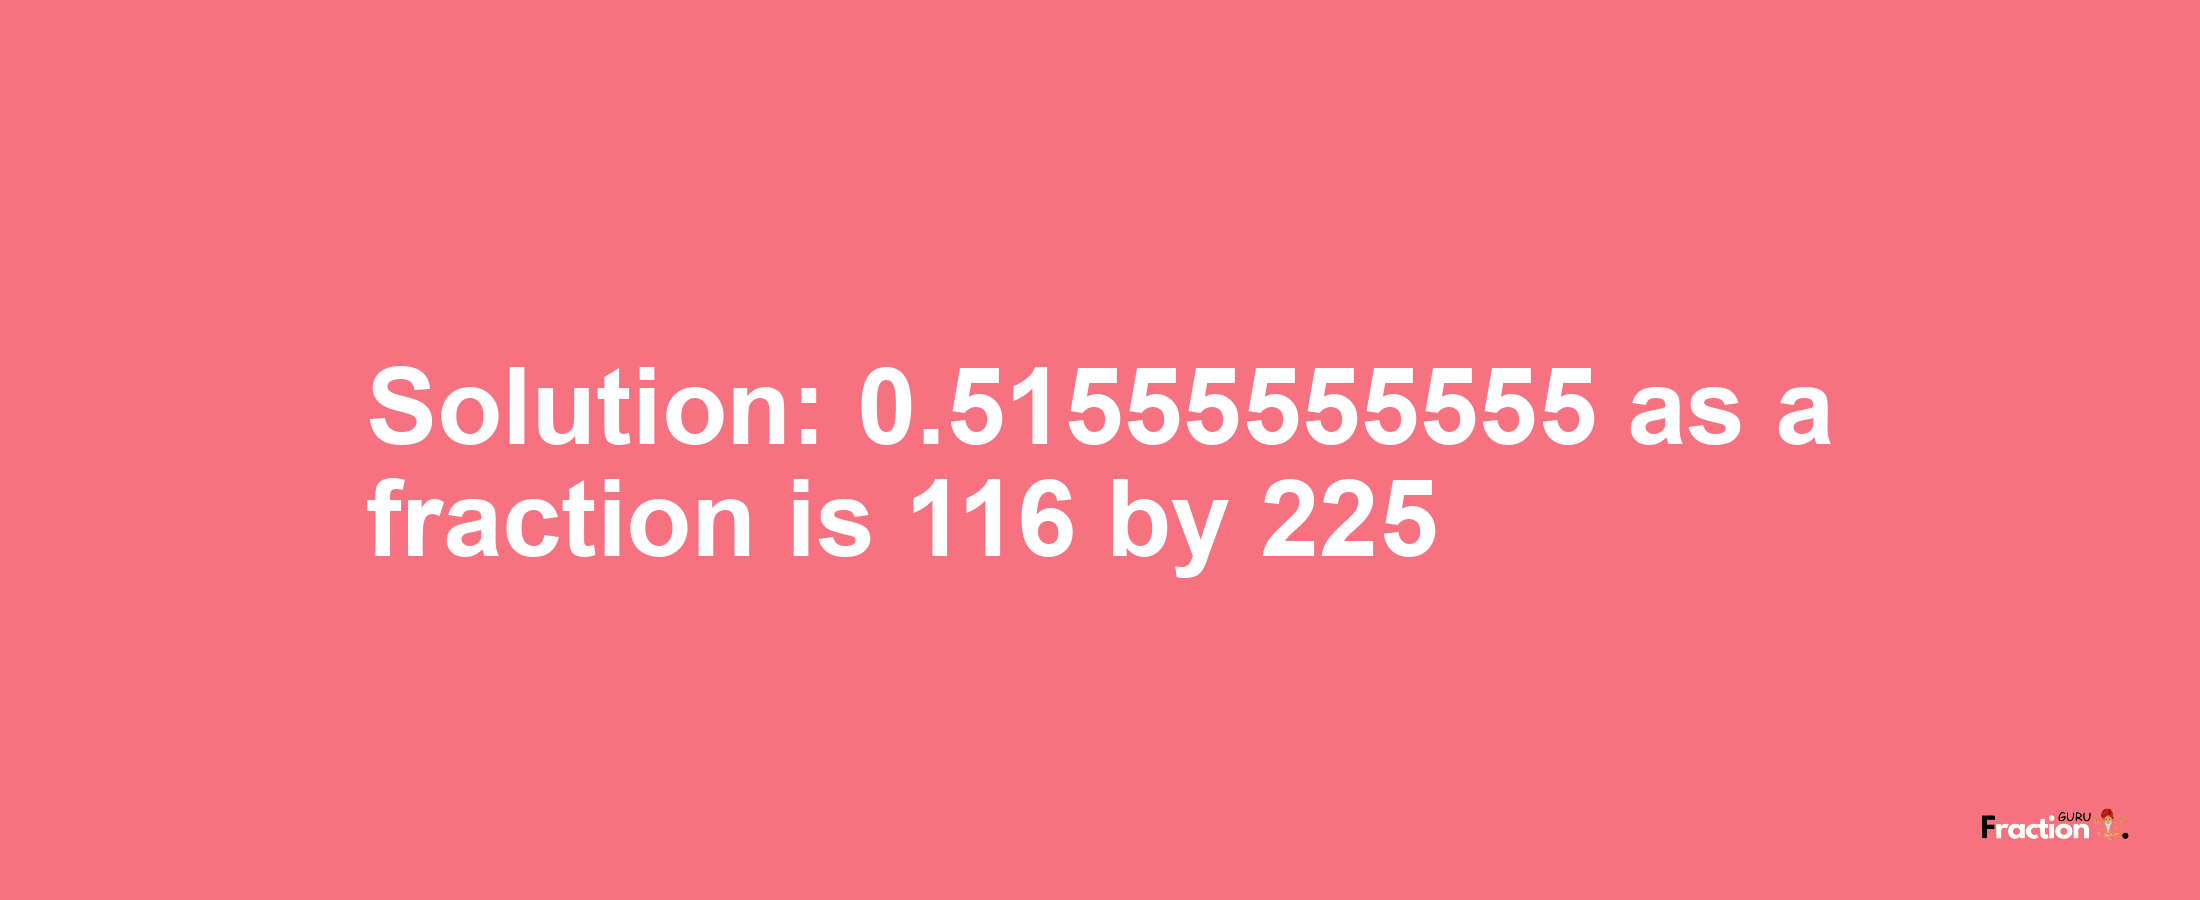 Solution:0.51555555555 as a fraction is 116/225